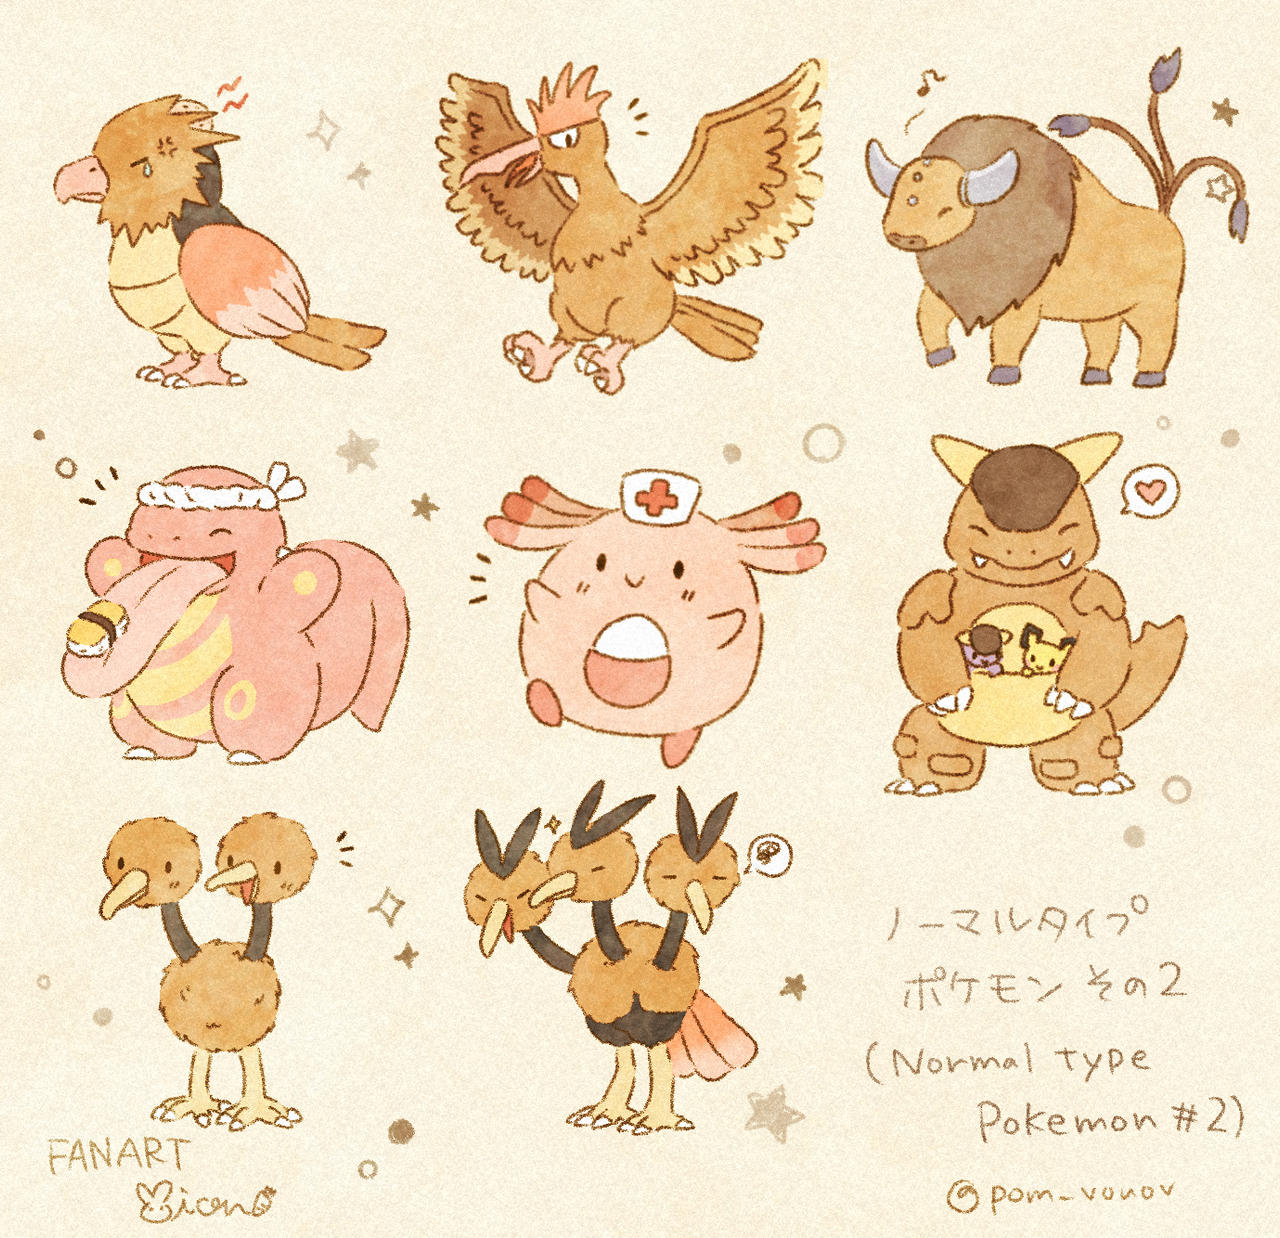 Normal Type Pokemon 2 By Mions Art On Deviantart